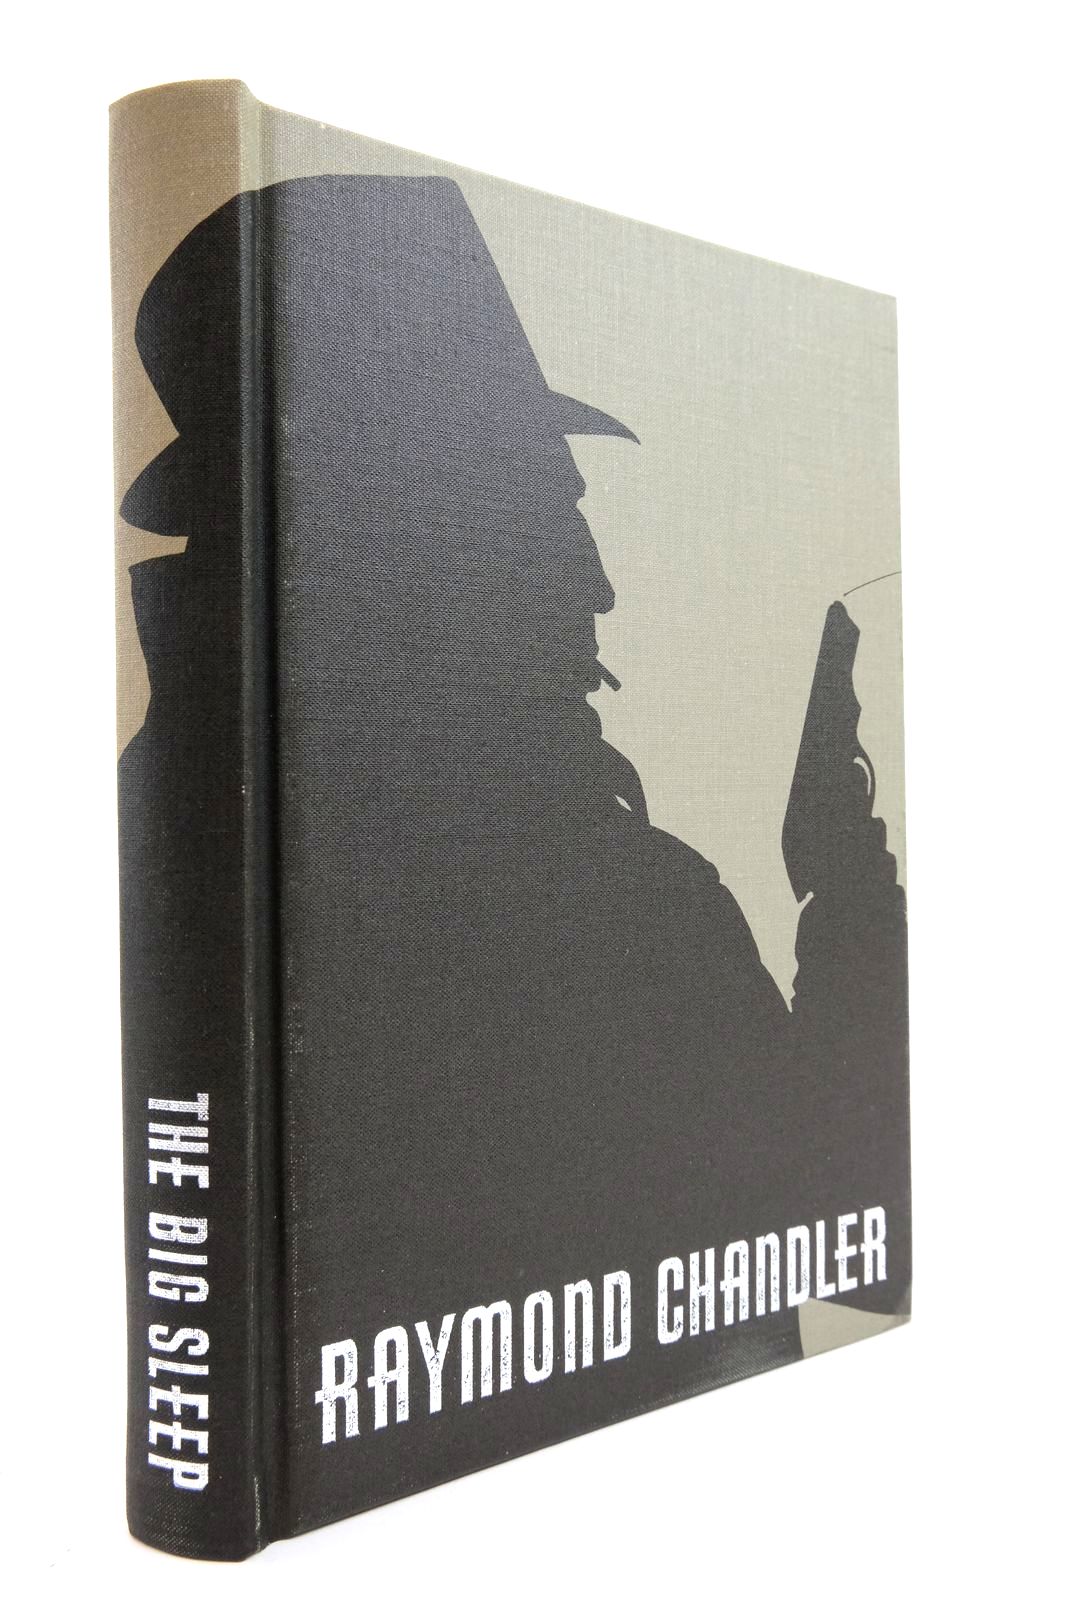 Photo of THE COMPLETE NOVELS (7 VOLUMES) written by Chandler, Raymond published by Folio Society (STOCK CODE: 2138942)  for sale by Stella & Rose's Books